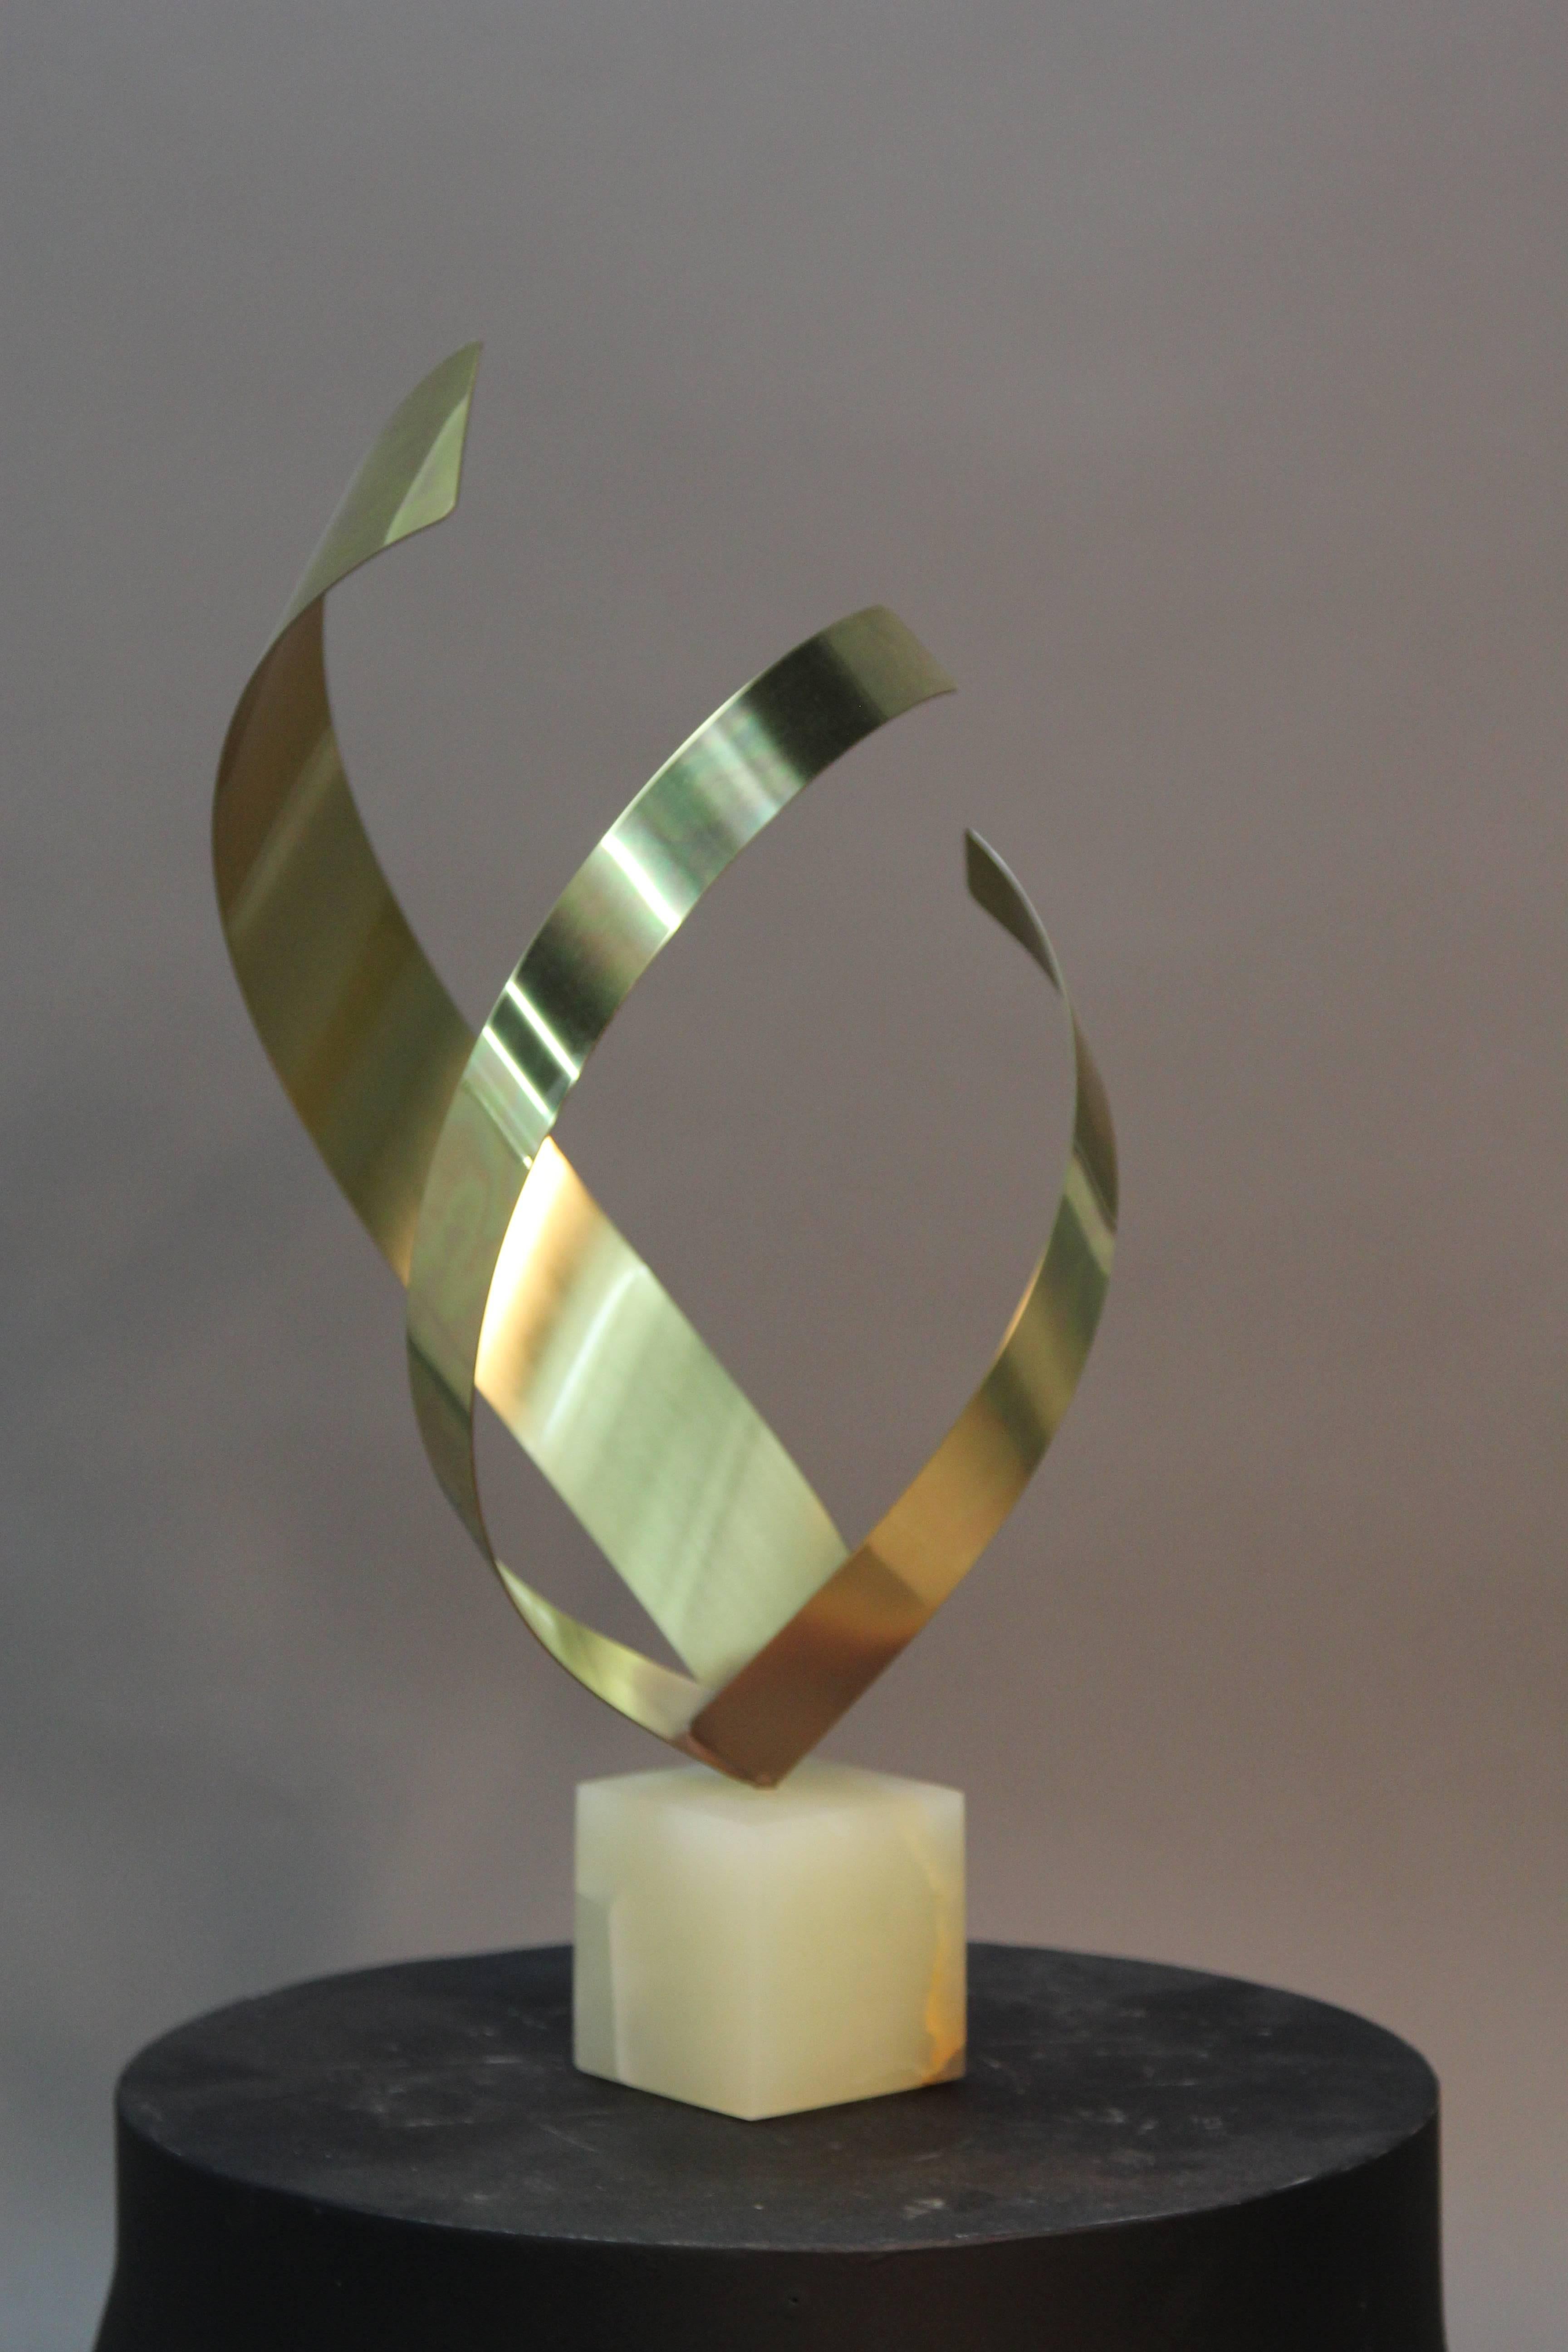 Modern Curtis Jere Flame/ Ribbon Sculpture with Onyx Base For Sale